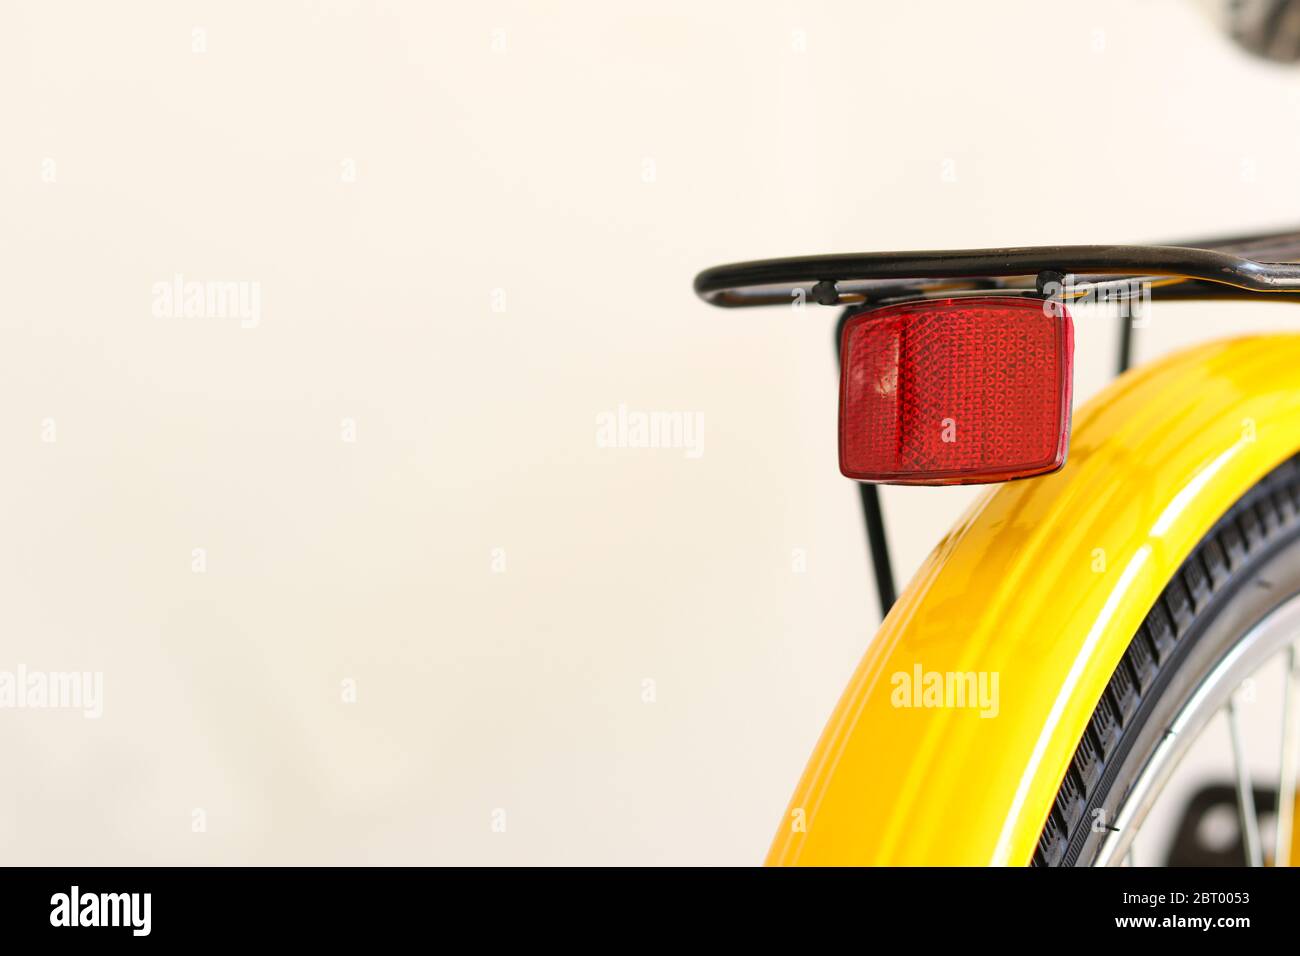 The reflector is installed on the back of the bicycle for nighttime safety. Stock Photo